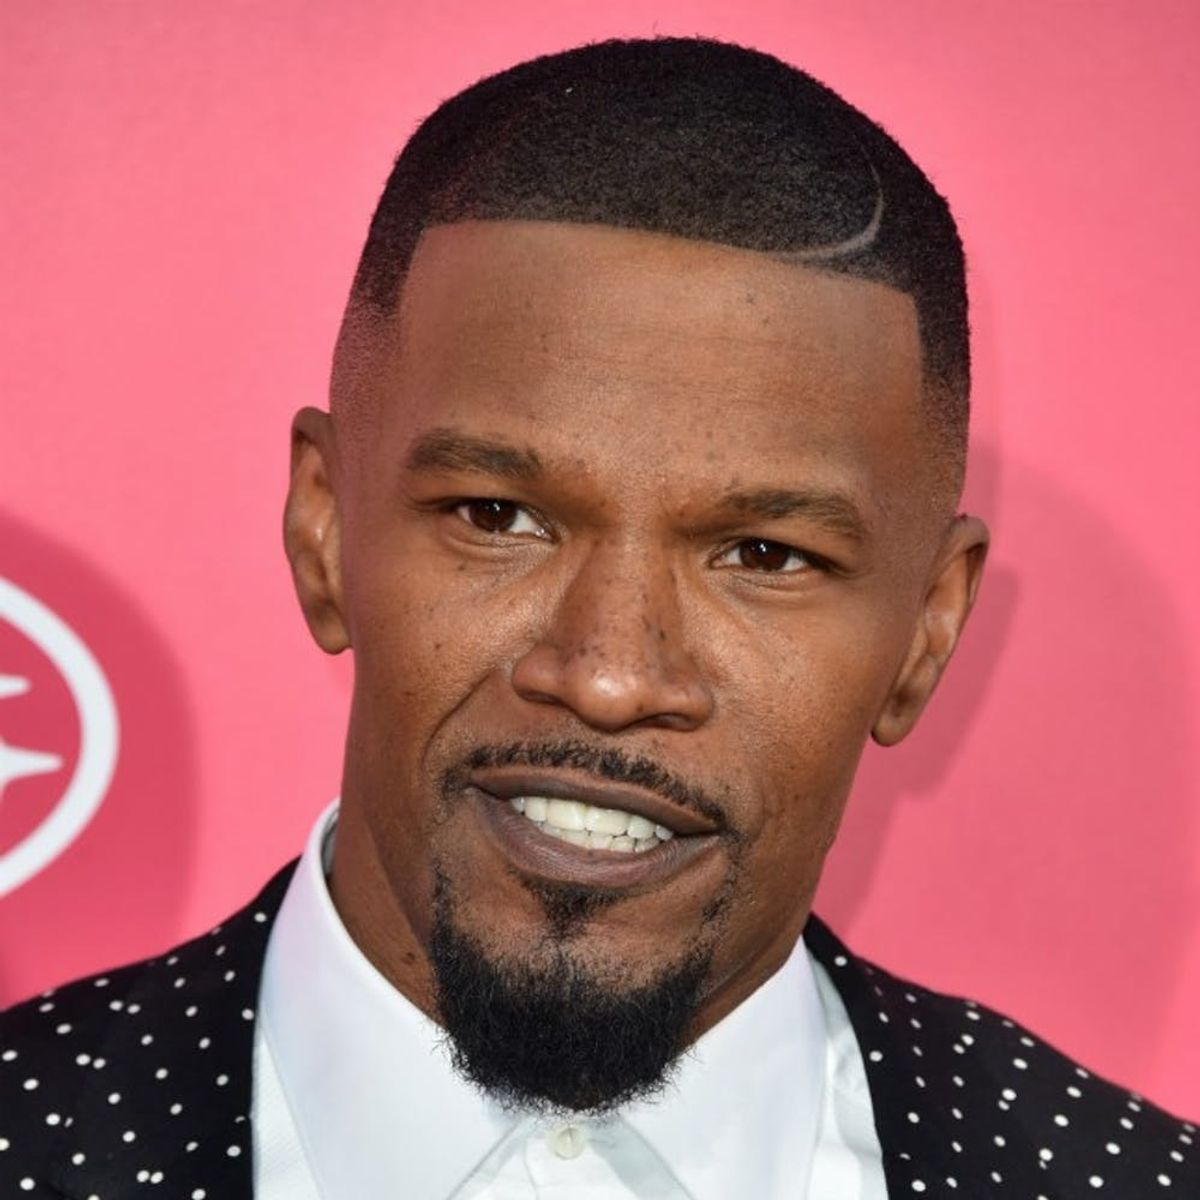 Jamie Foxx Just Added to the Speculation About Beyoncé’s Twins